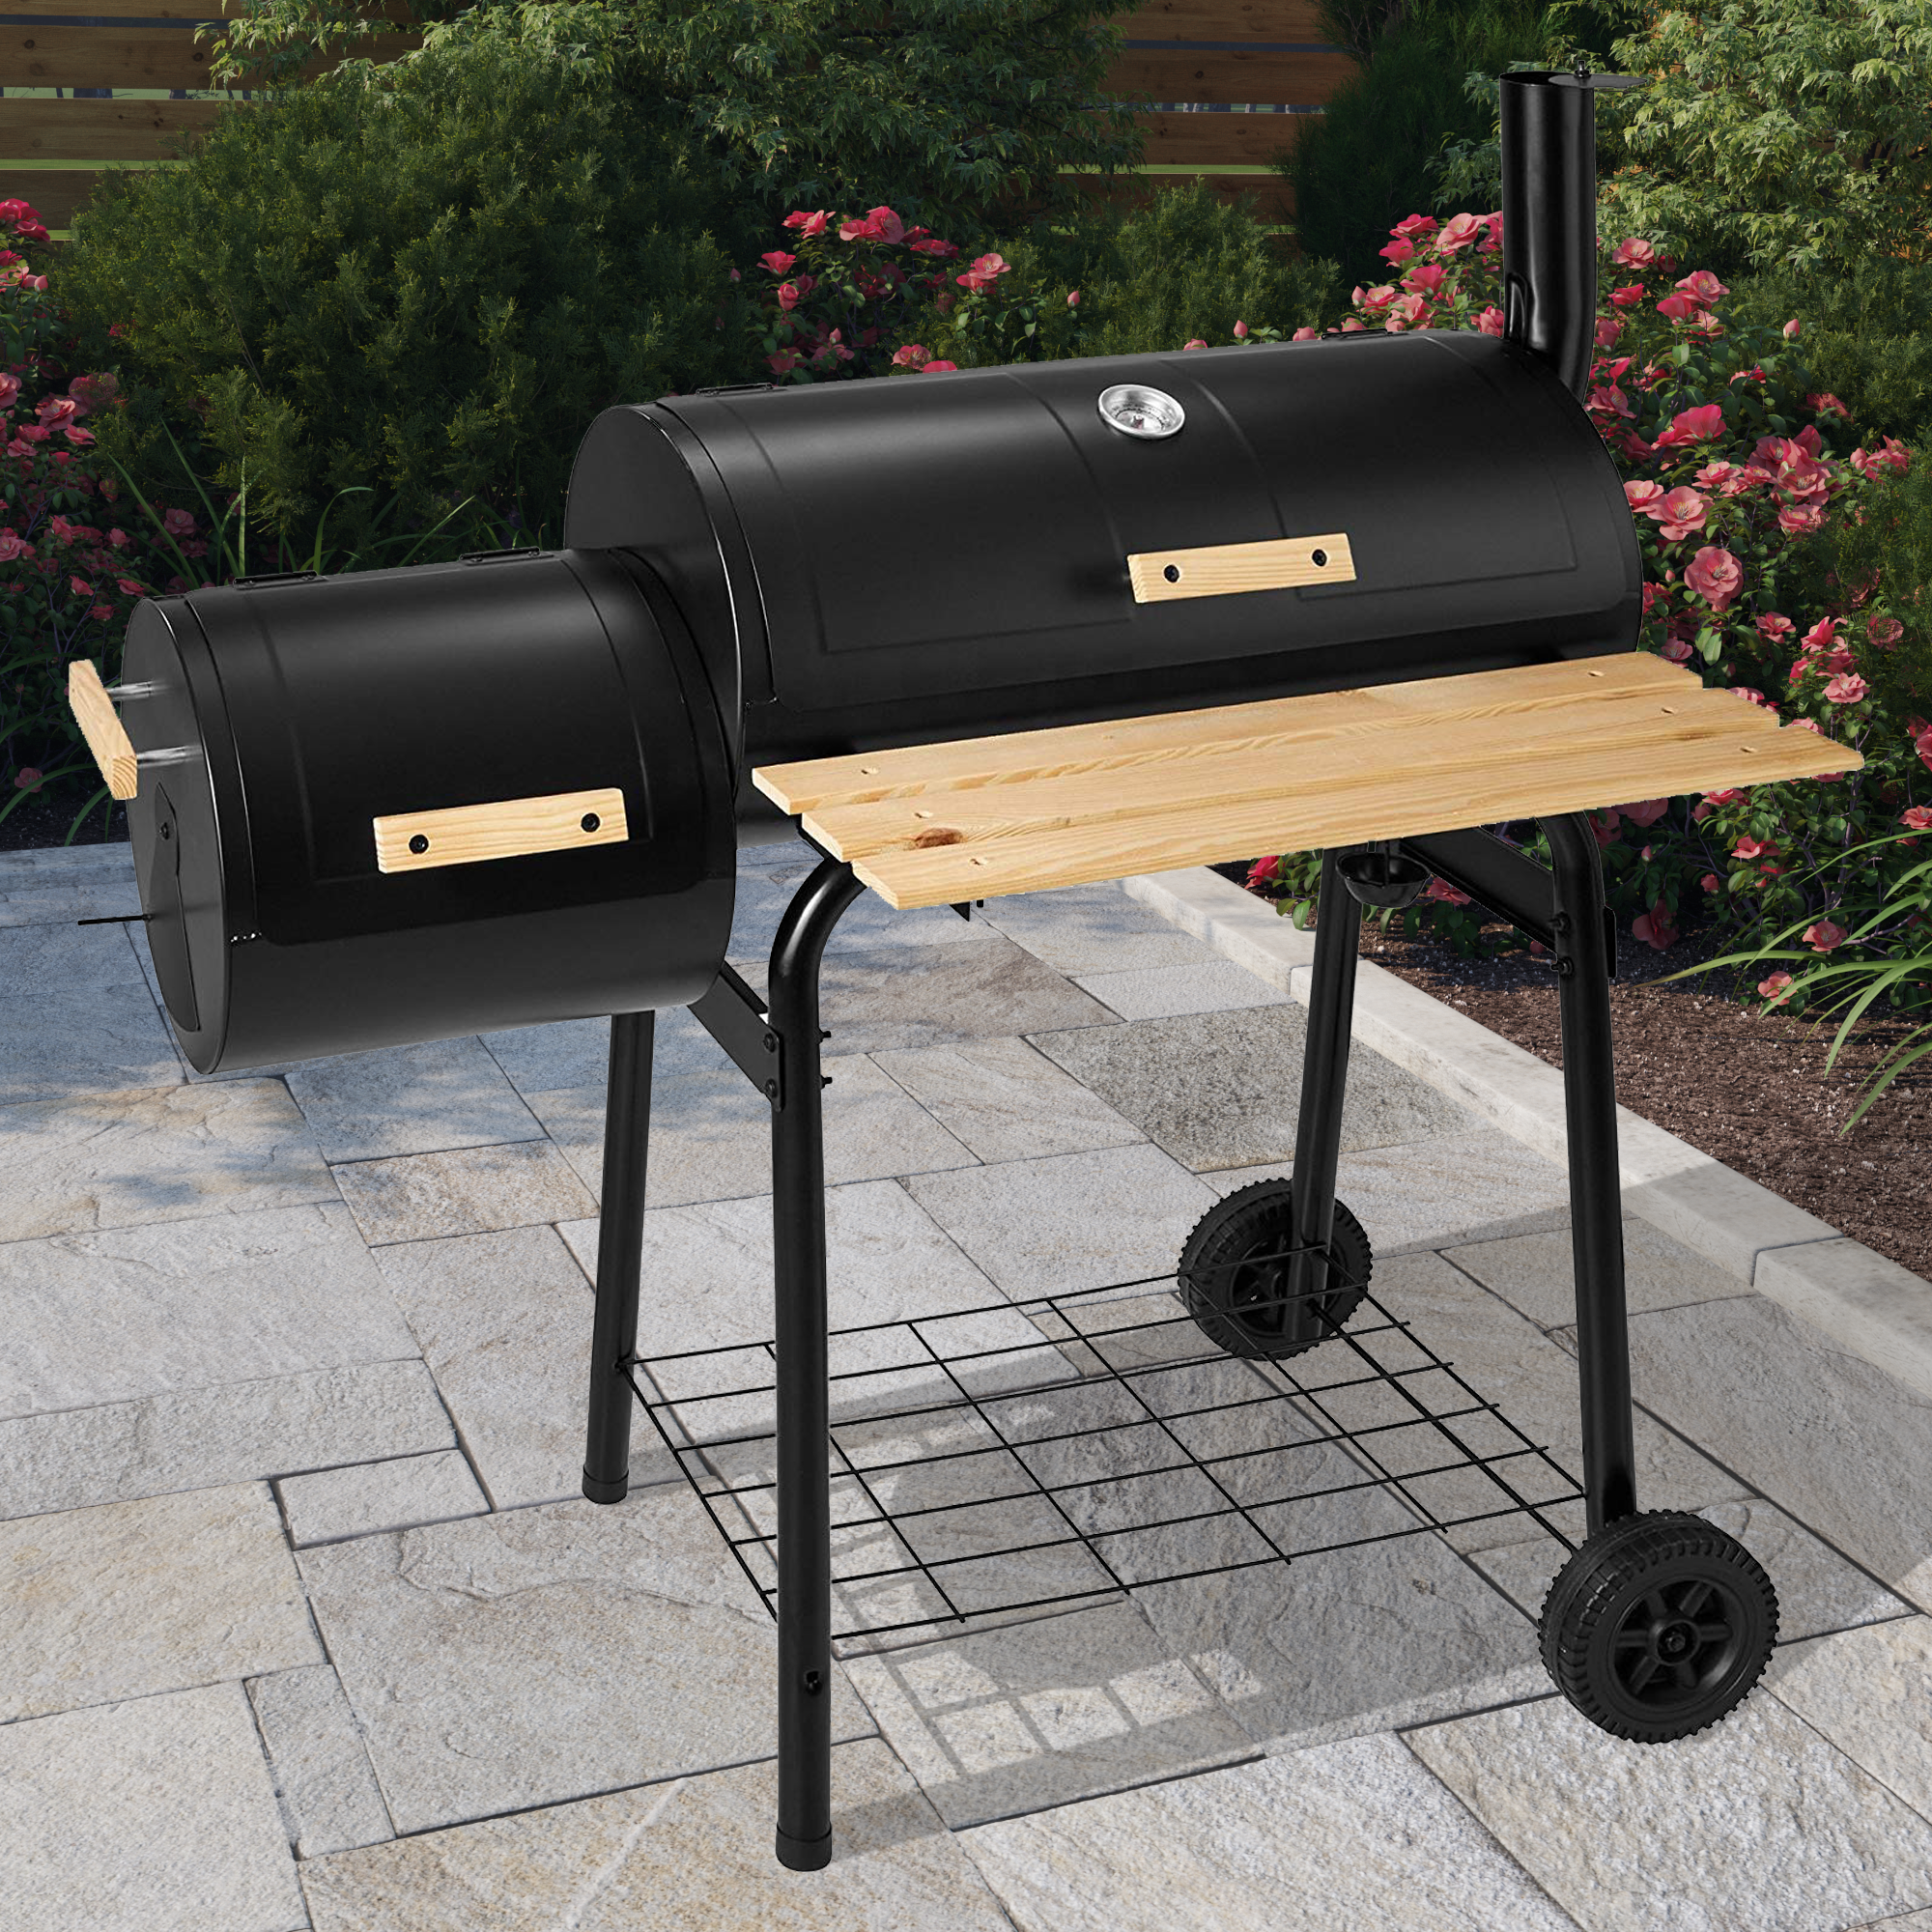 Billyoh Smoker Bbq Charcoal Grill Full Drum Offset Smoker Barbecue Portable Full Drum